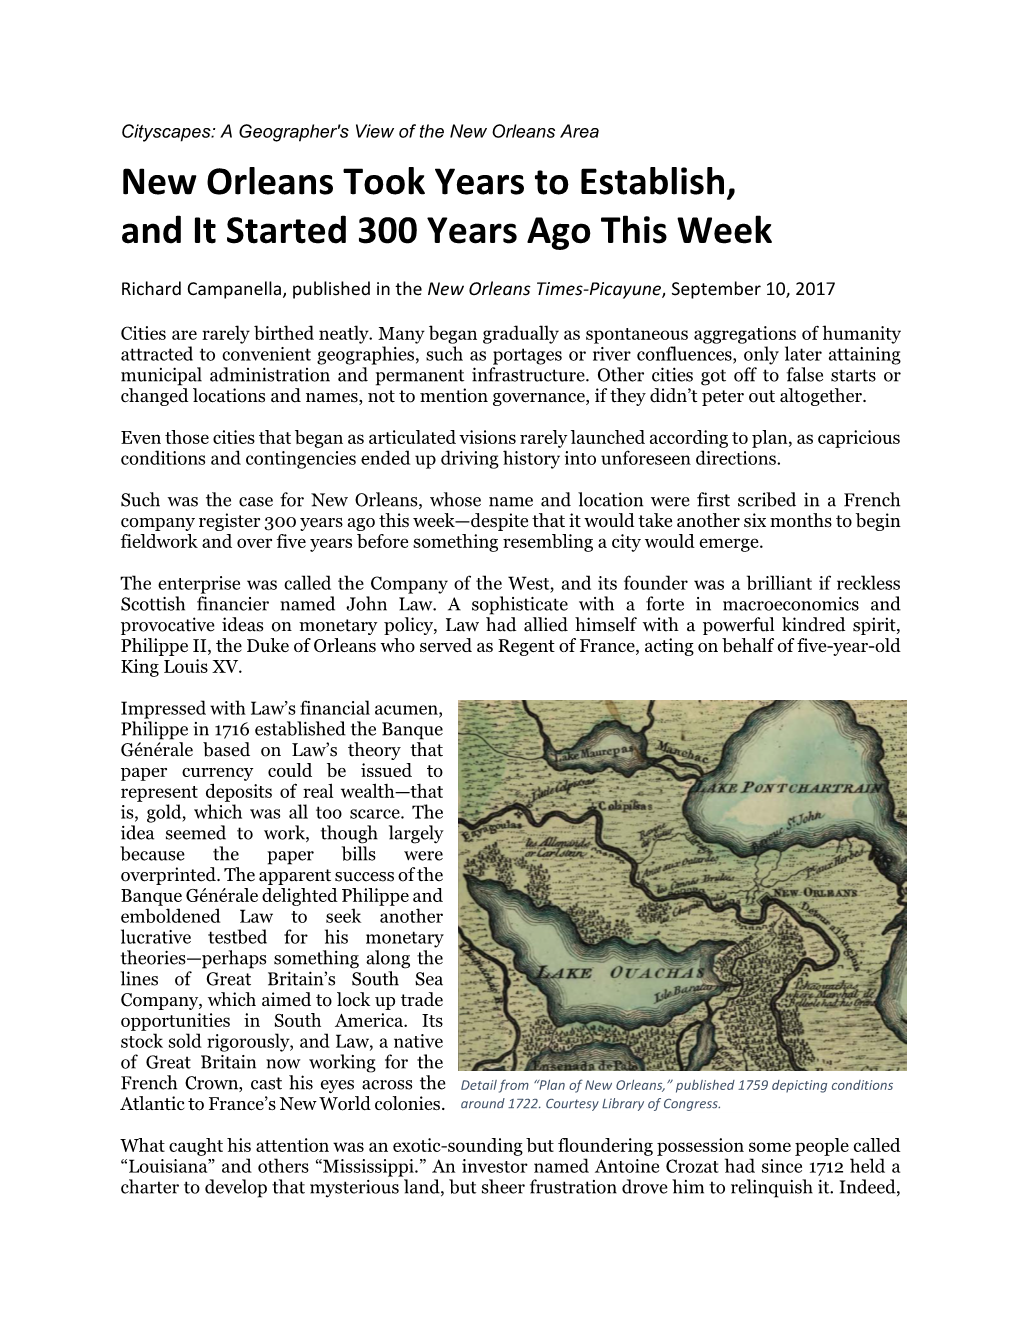 The Initial Conception of New Orleans